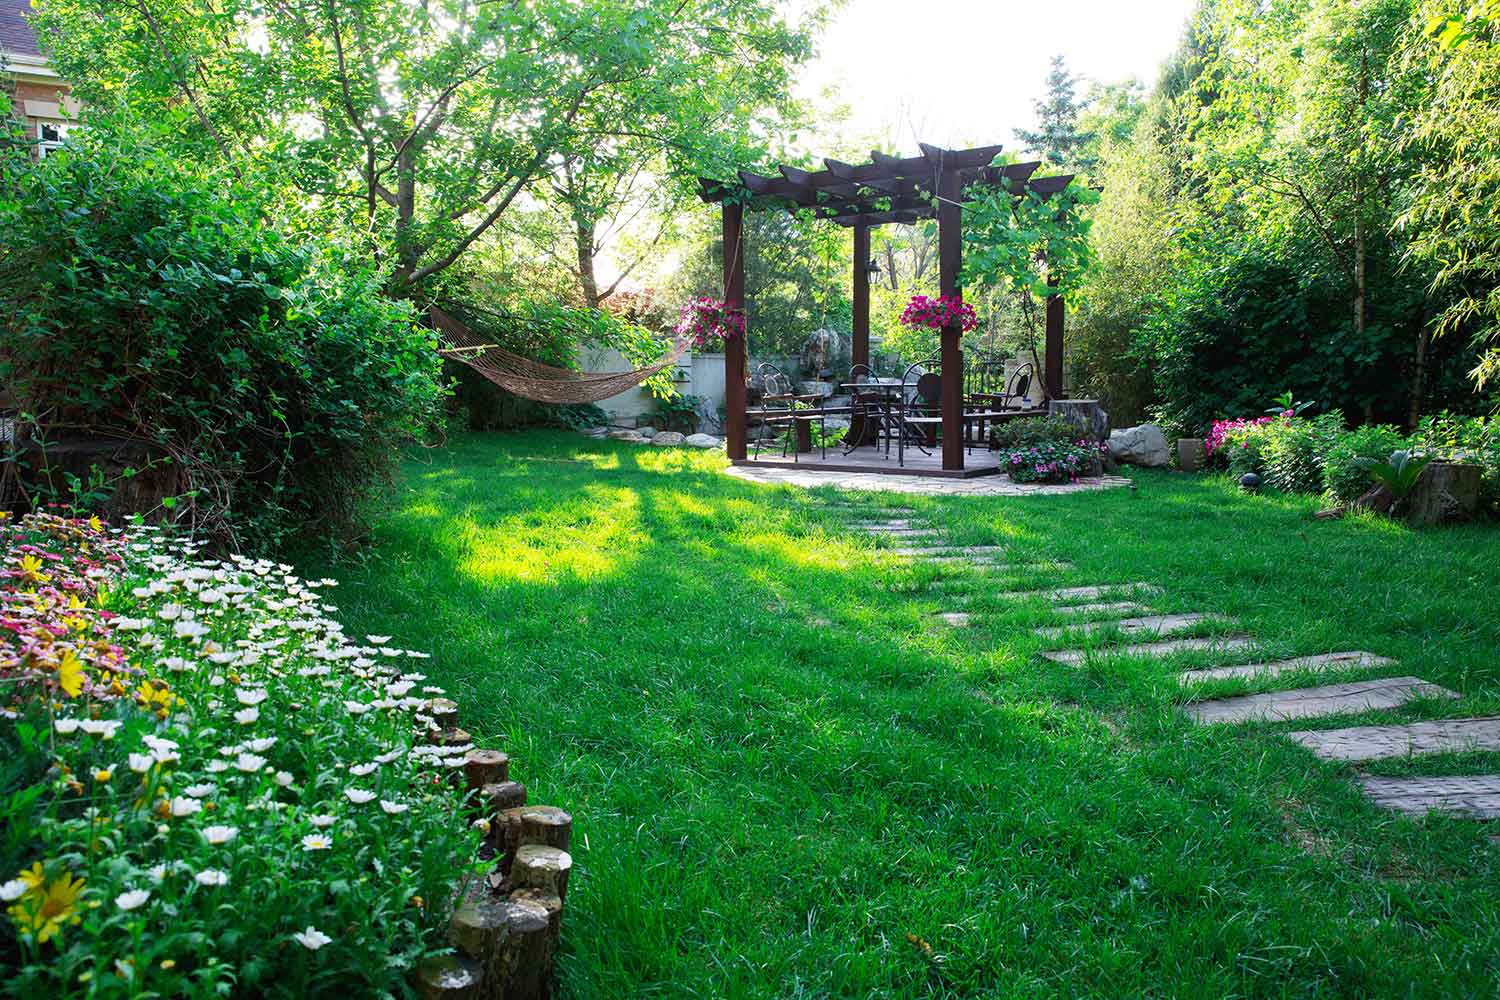 Plants that could cause problems in your backyard | Better Homes and